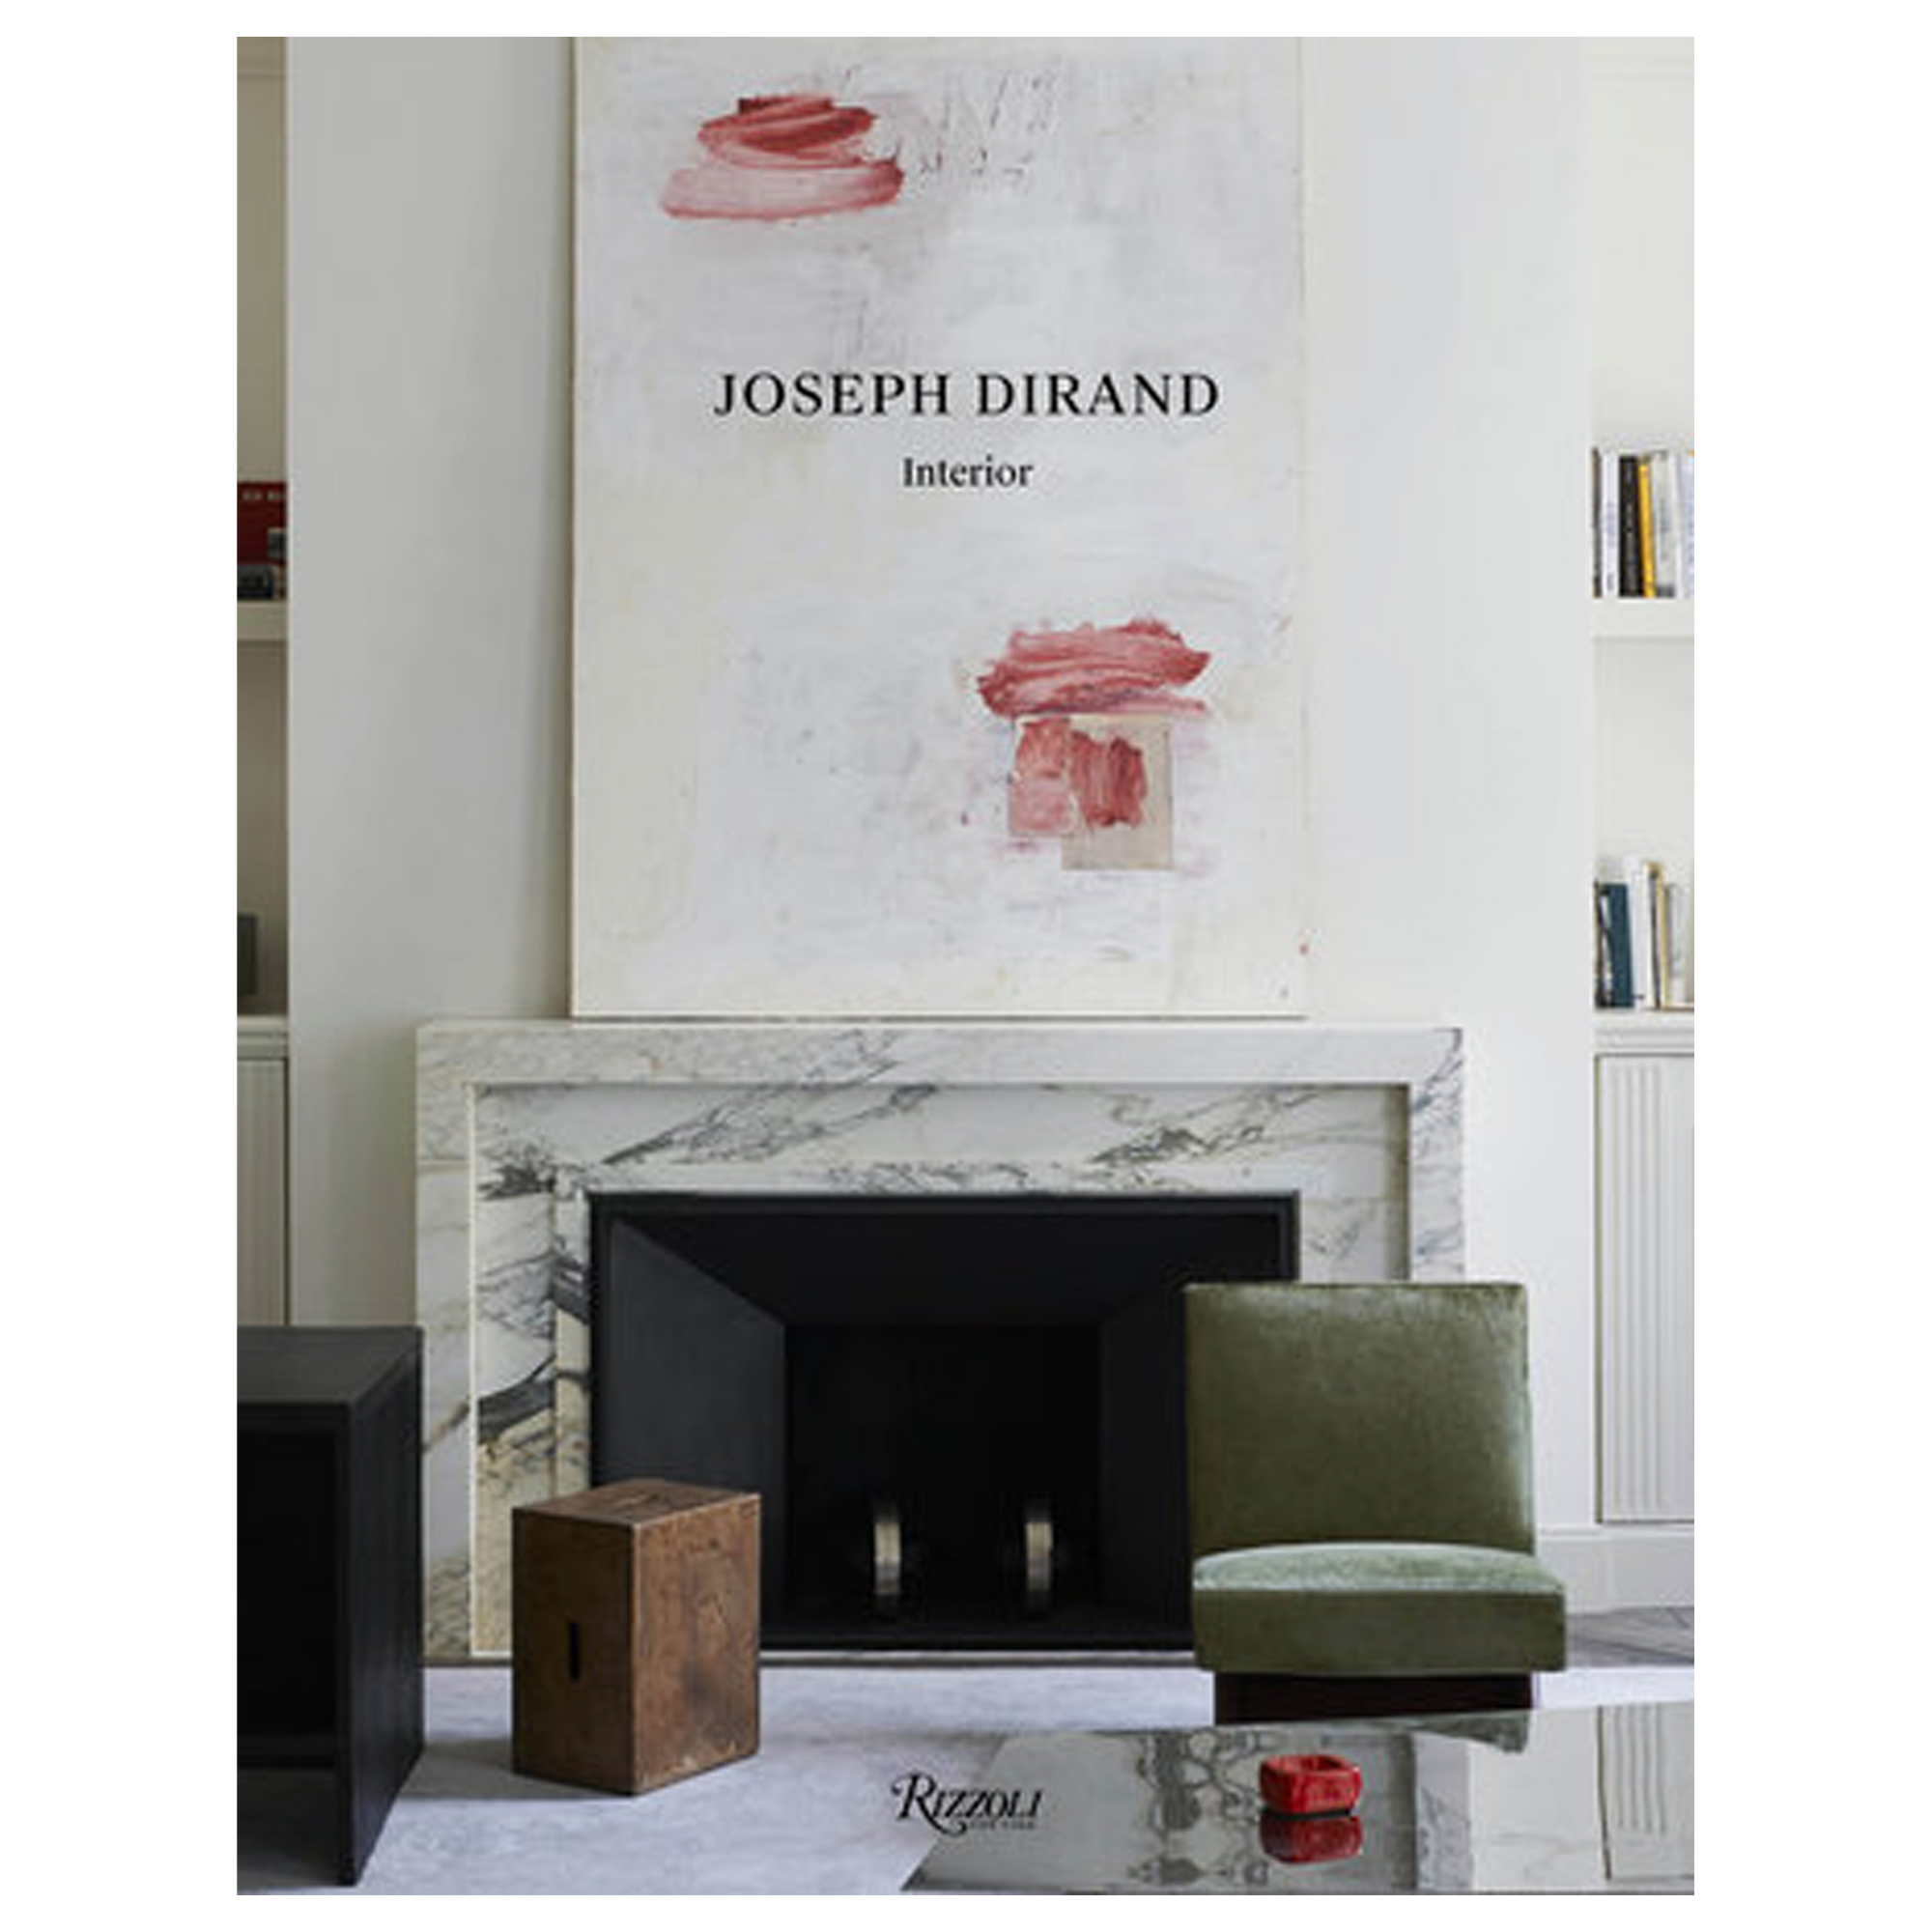 The son of Jacques Dirand, one of the most renowned interior photographers of his time, Joseph Dirand is now one of the most sought-after architects.